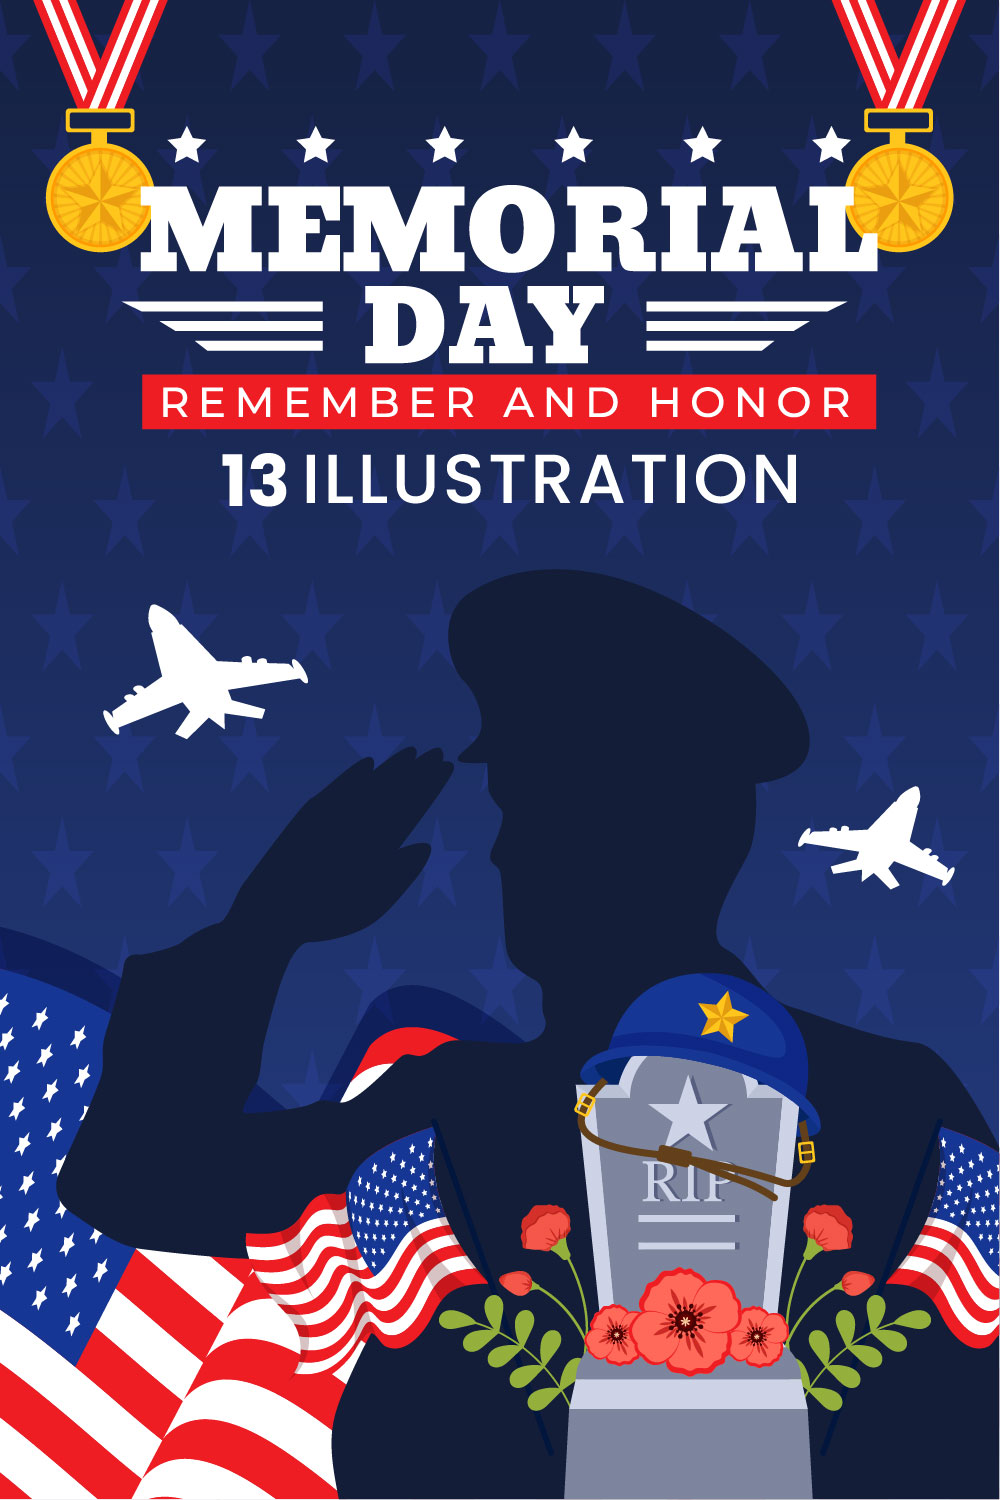 13 Memorial Day Illustration pinterest preview image.